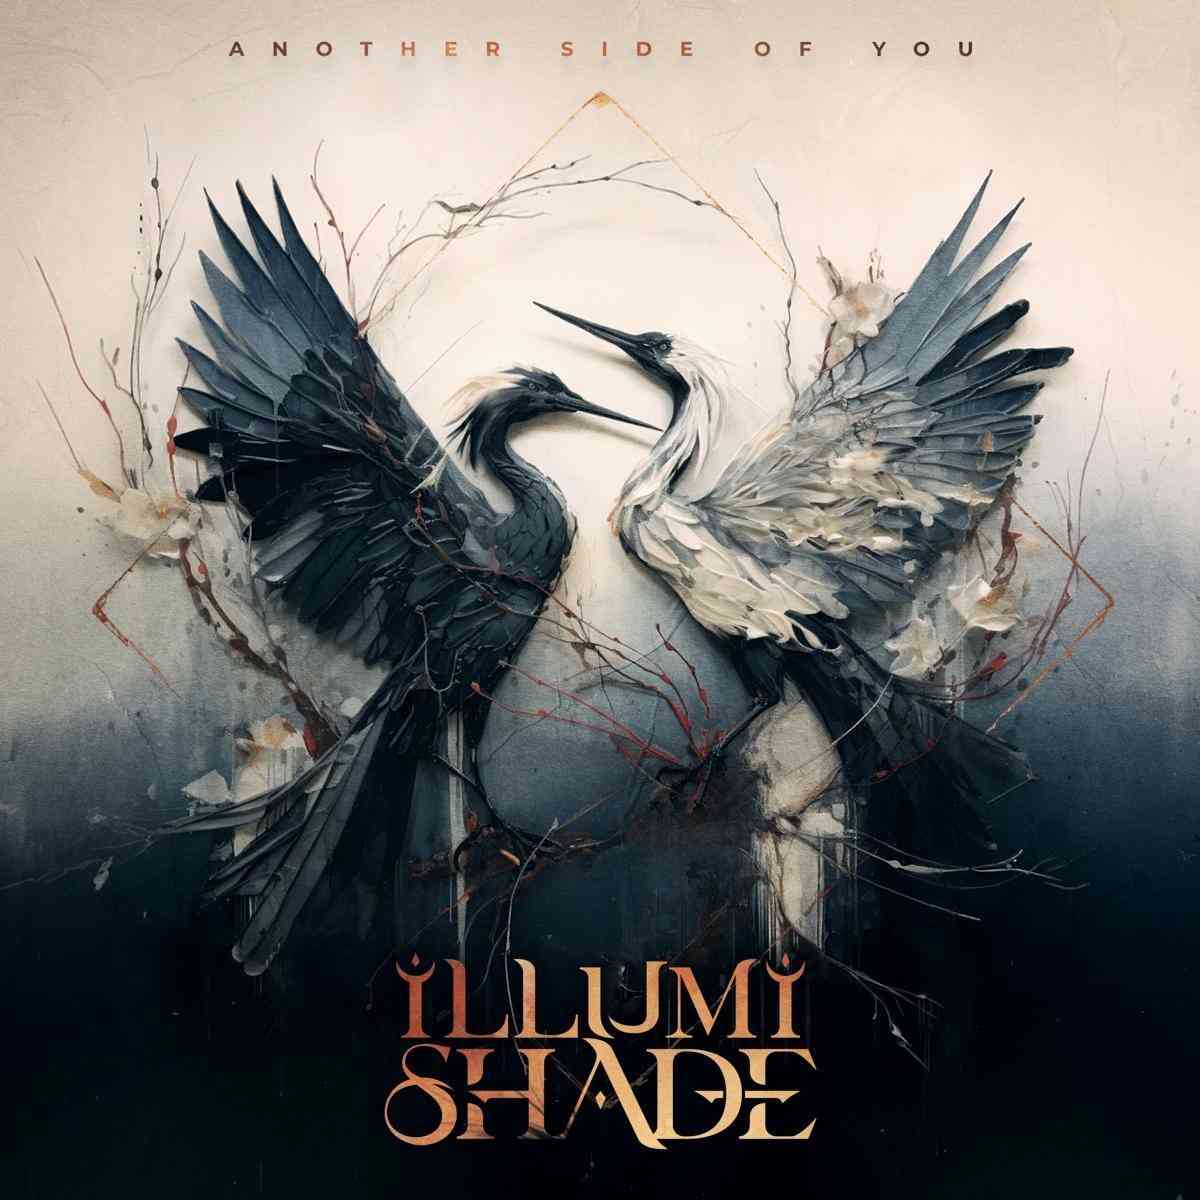 ILLUMISHADE - Another Side of You - album cover